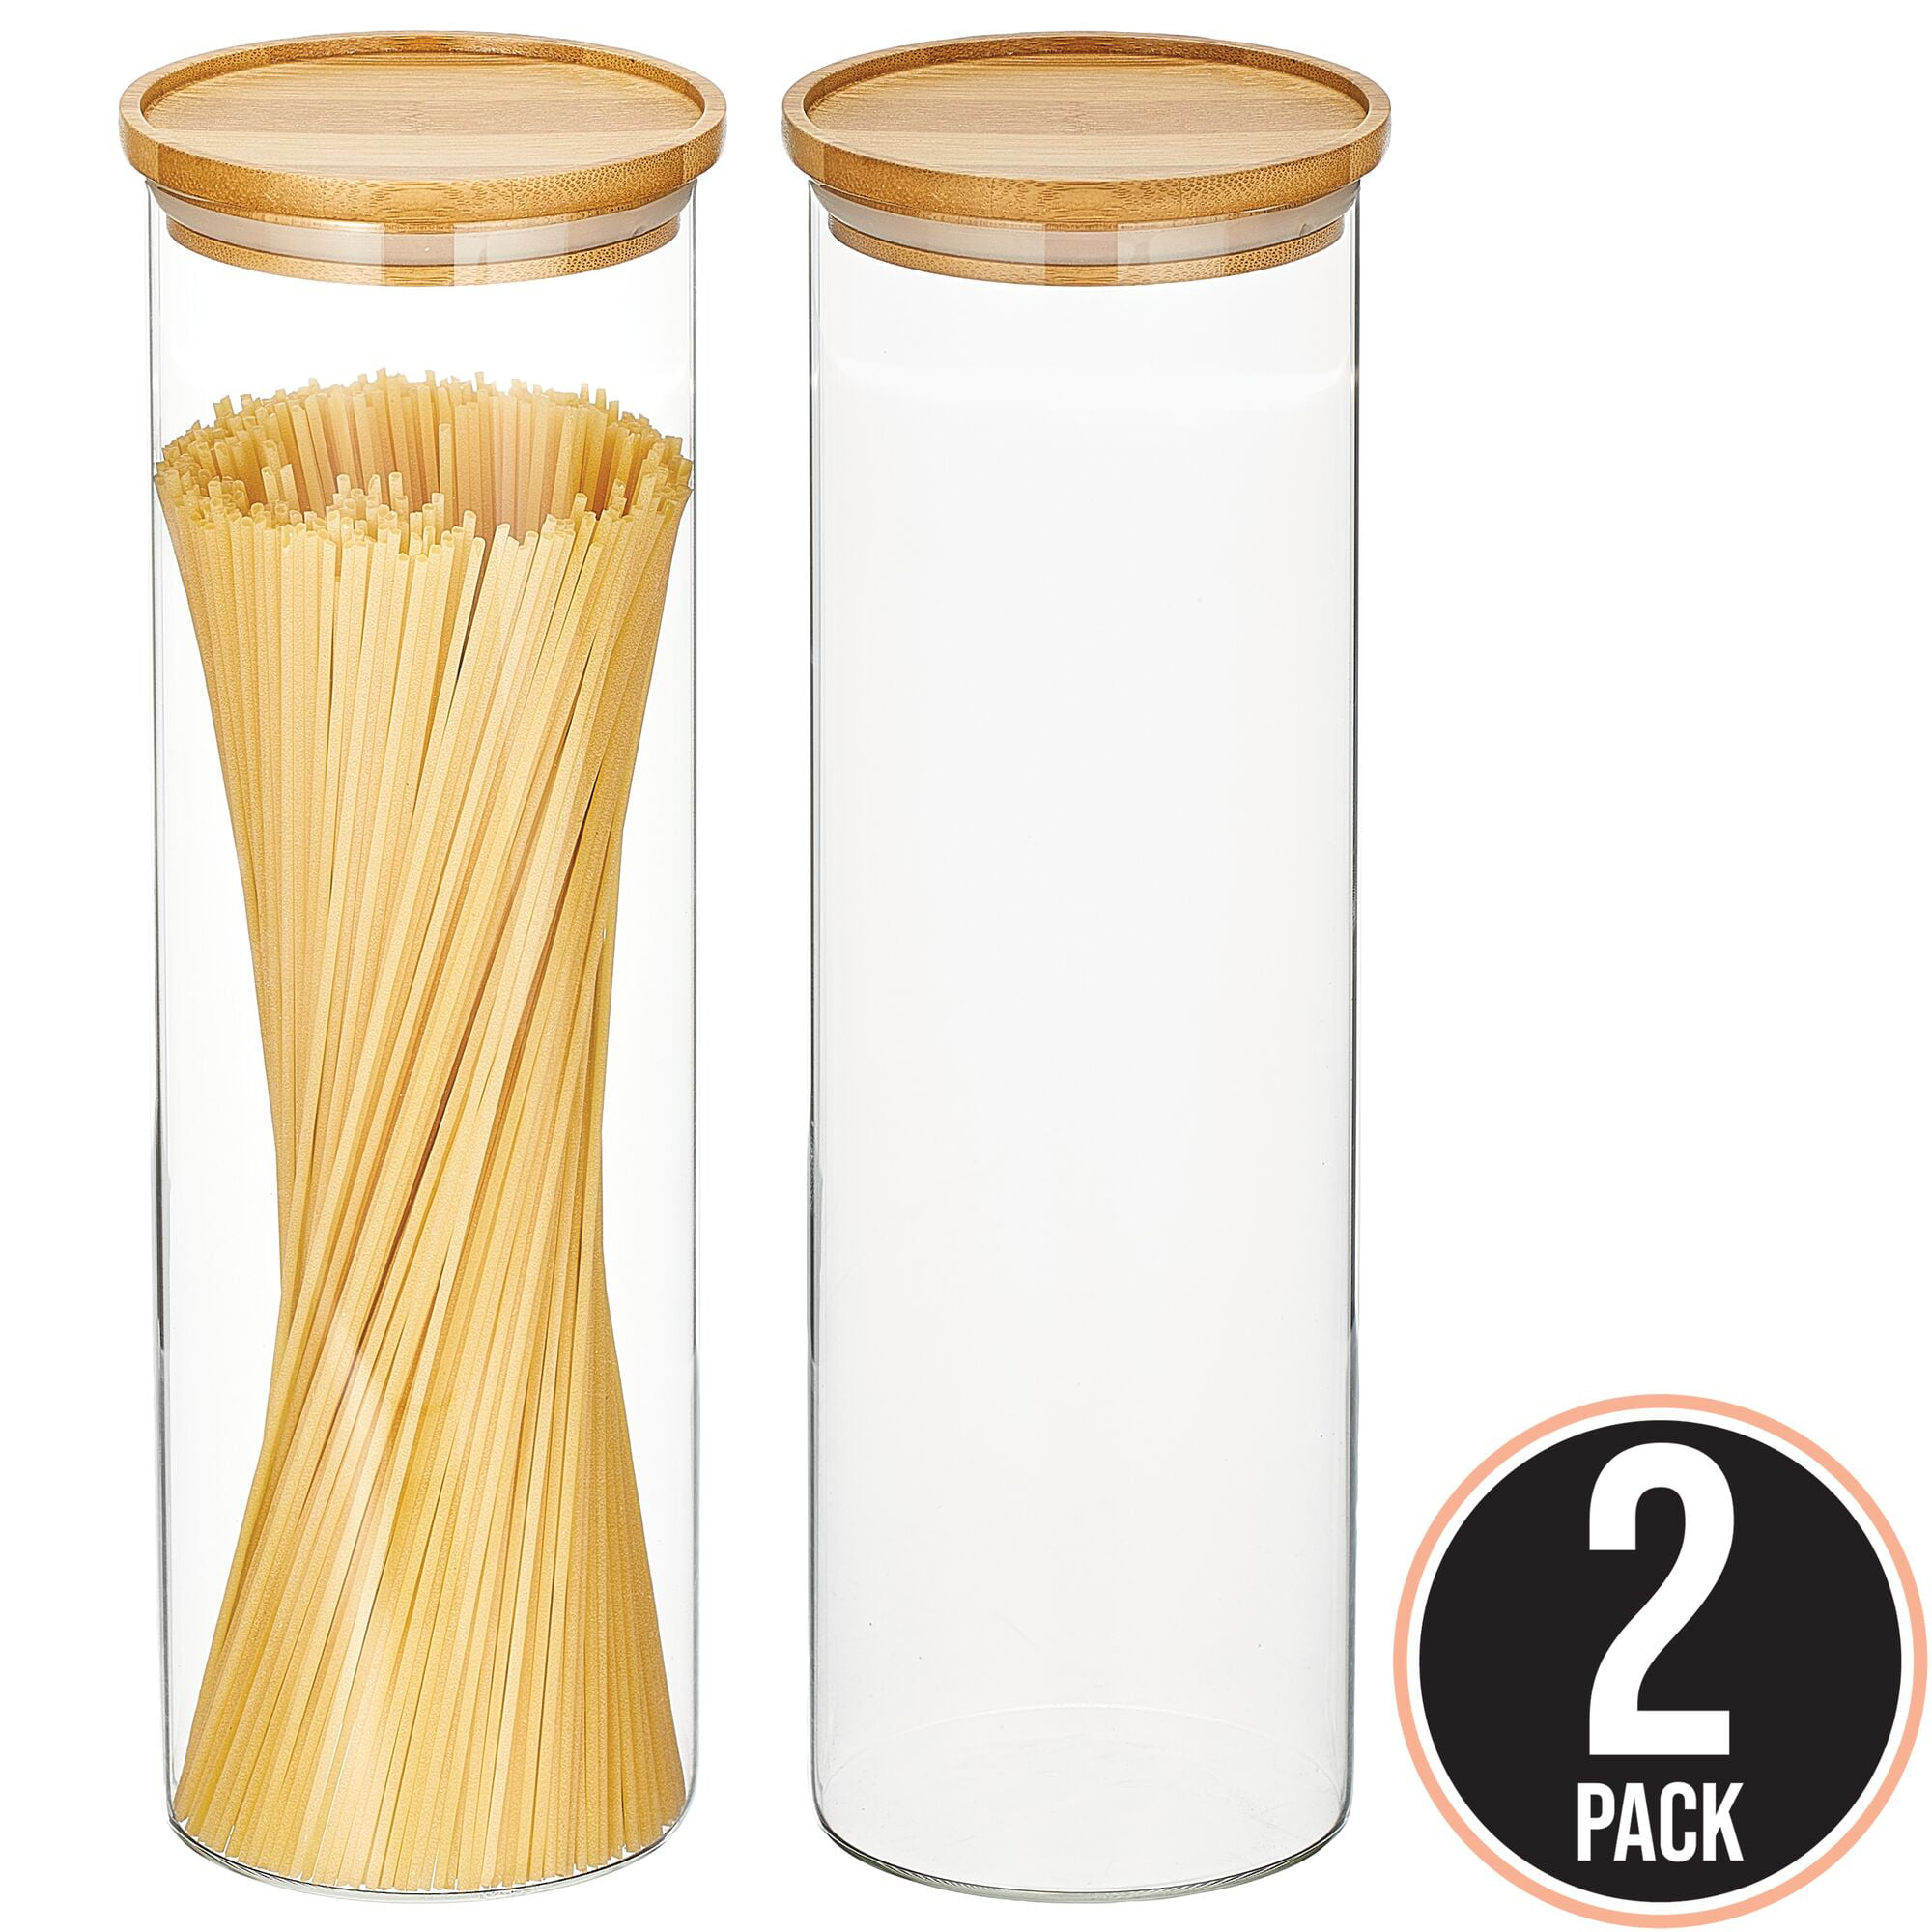 MegaChef 985111720M Kitchen Food Storage and Organization 5-Piece Canister Set with Bamboo Lids